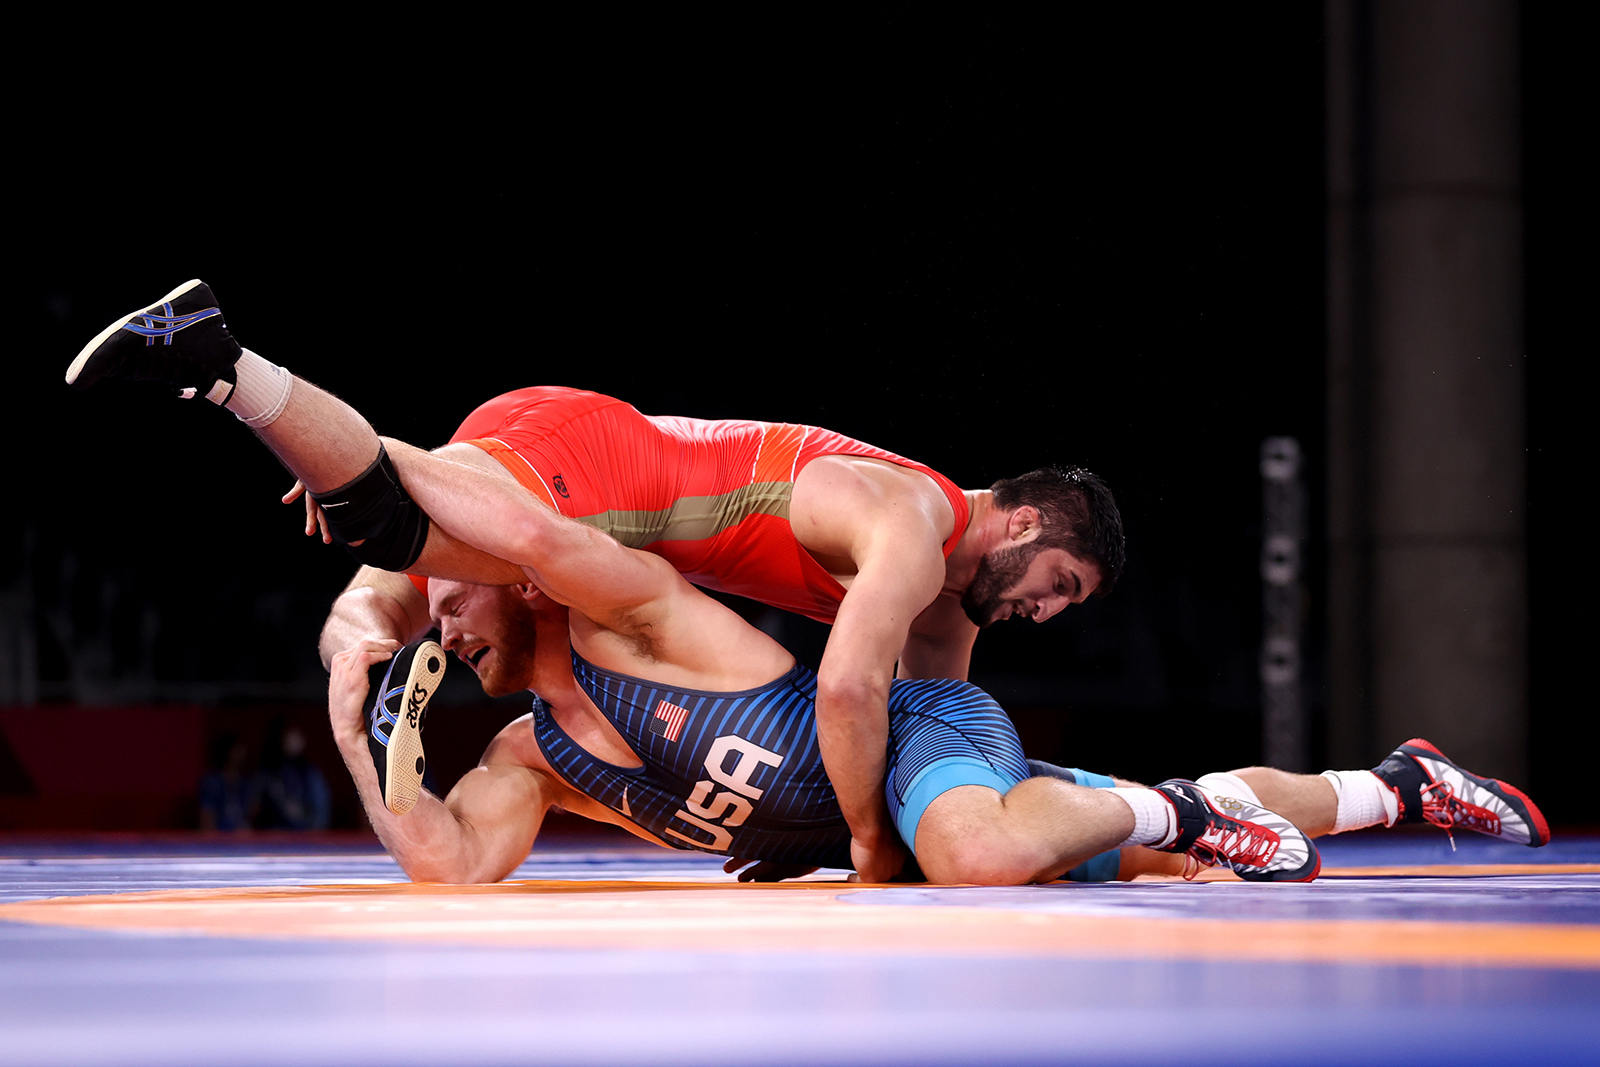  Russia's Abdulrashid Sadulaev competes against Kyle Snyder of Team United States during the Men's Freestyle 97kg Final on day fifteen of the Tokyo 2020 Olympic Games at Makuhari Messe Hall on August 7, in Tokyo.